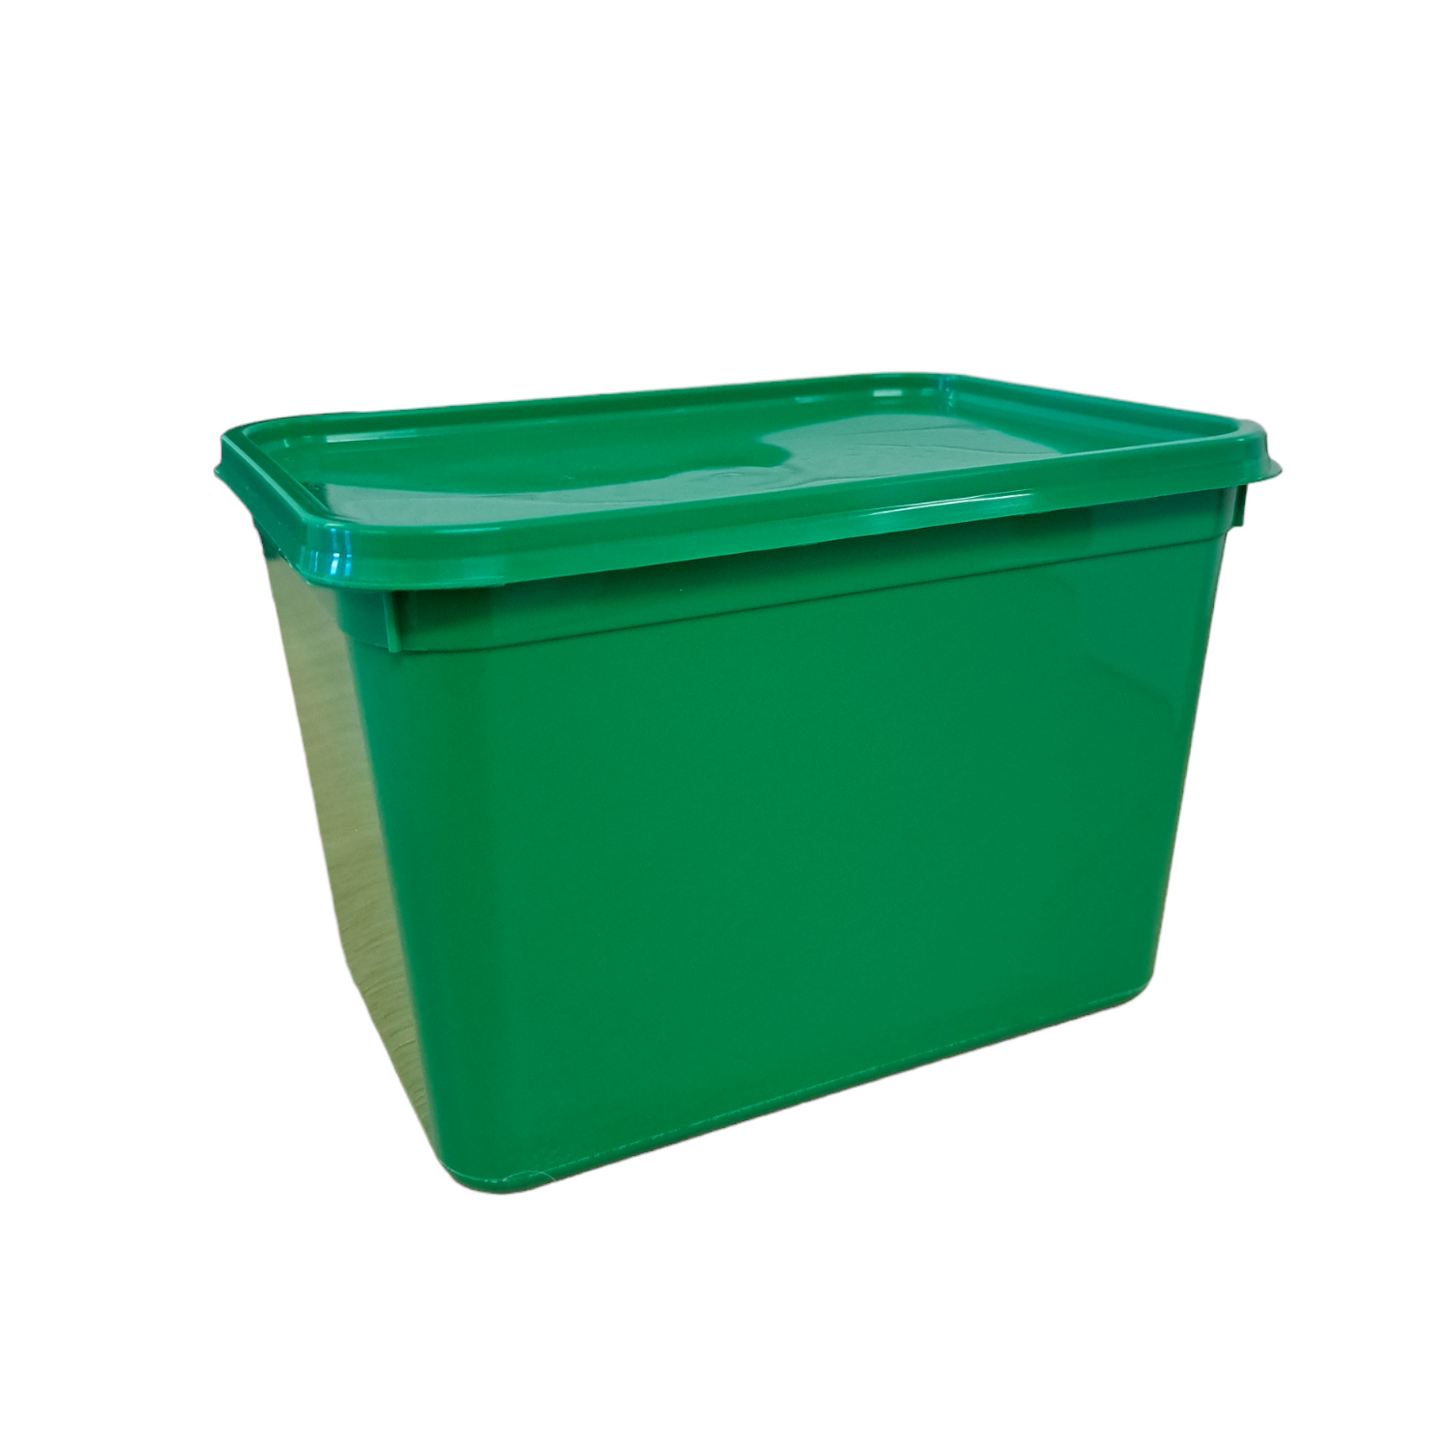 4 litre rectangle standard container & lid